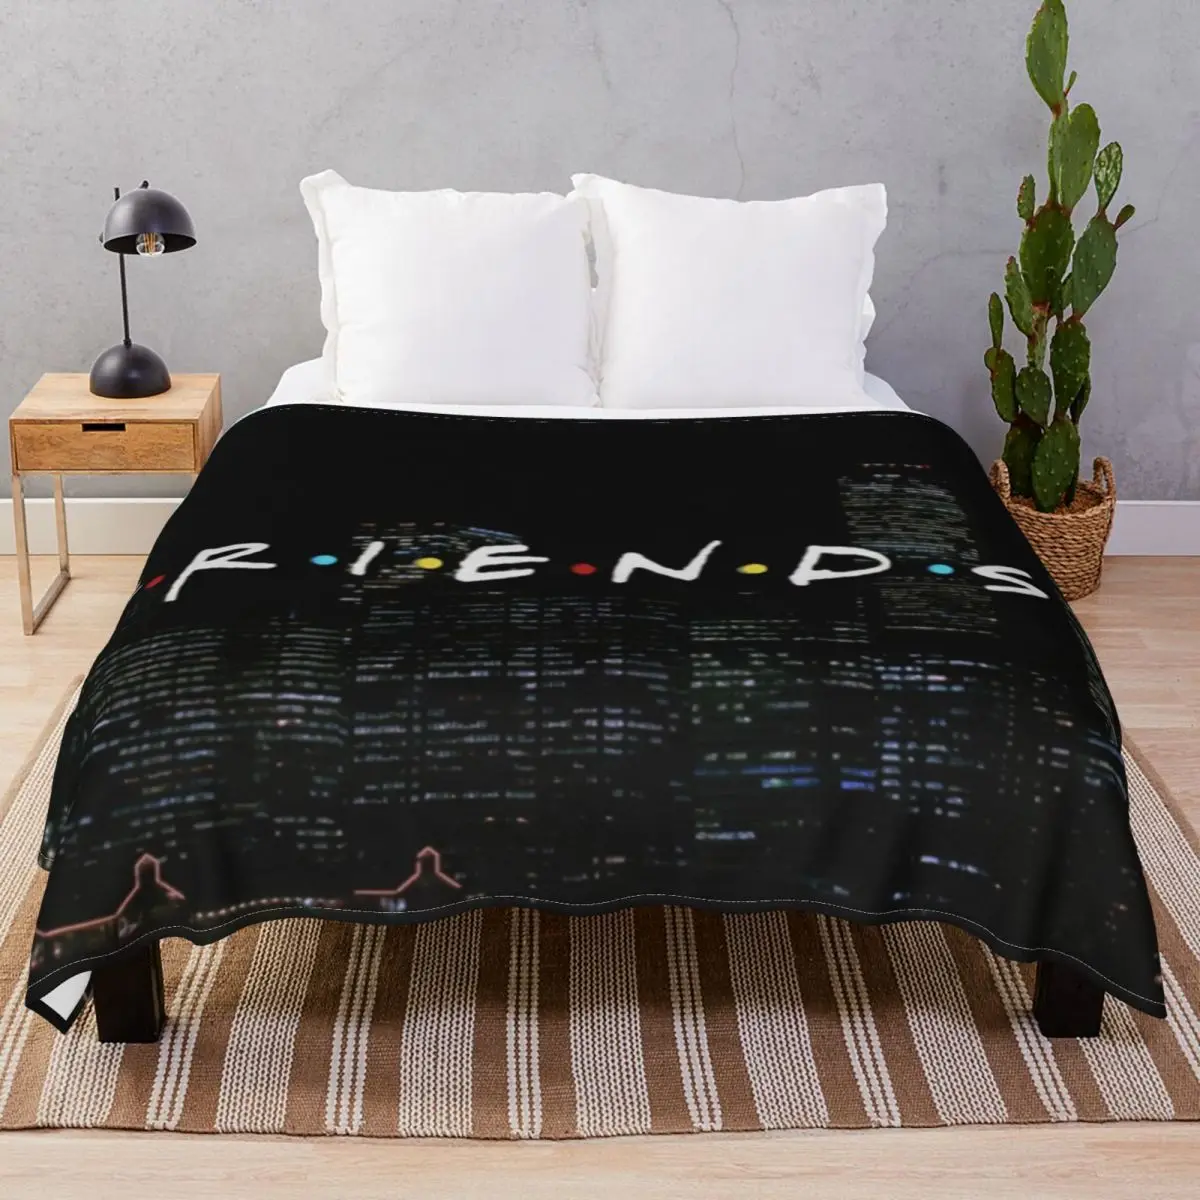 Friends Blankets Flannel Print Fluffy Throw Blanket for Bed Sofa Camp Office